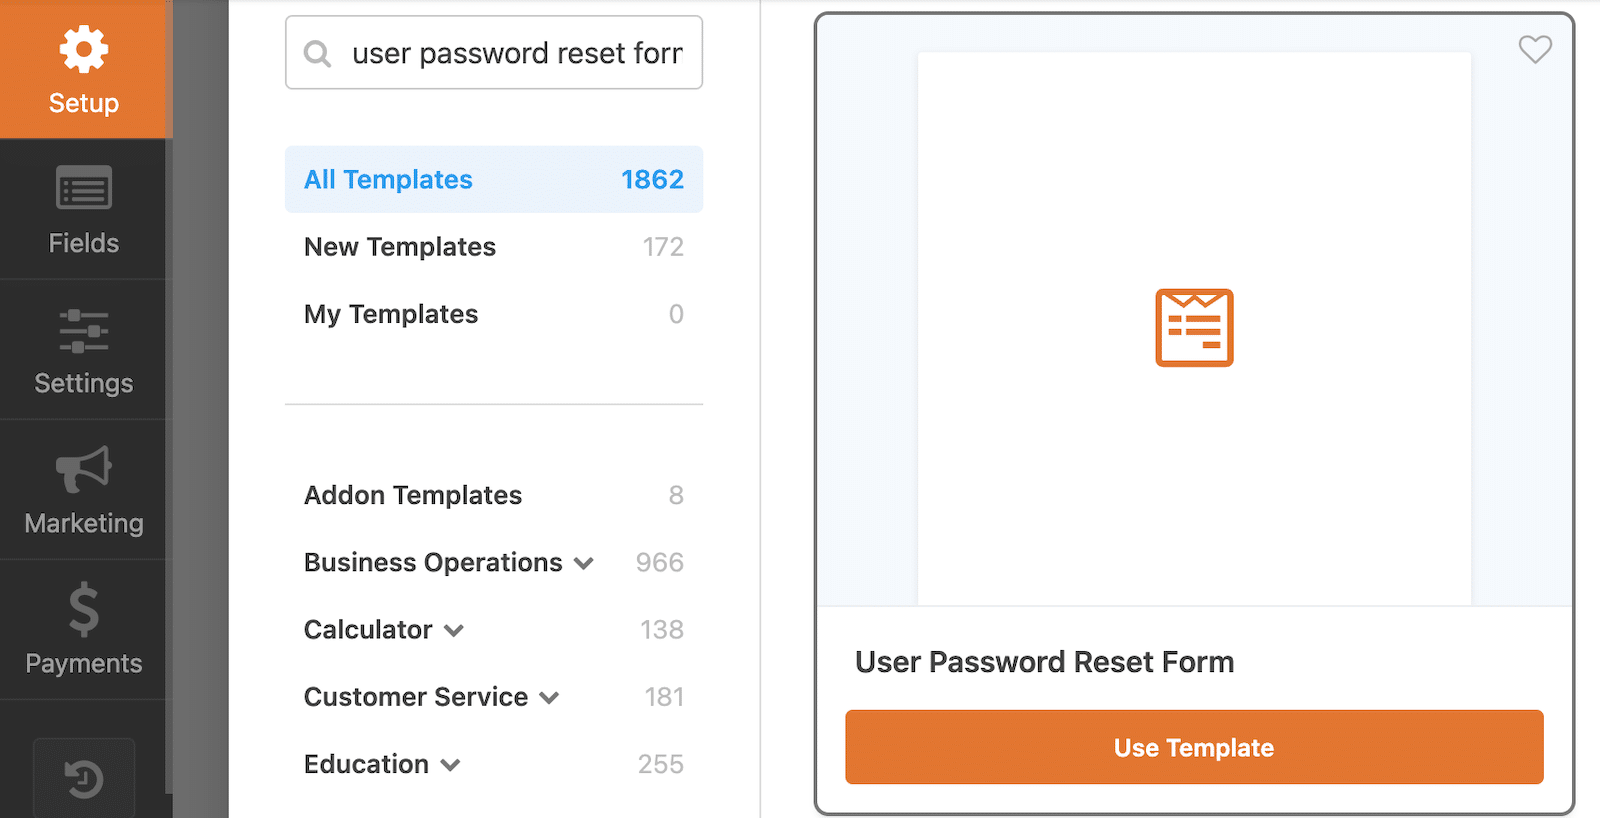 Select the User Password Reset Form template.